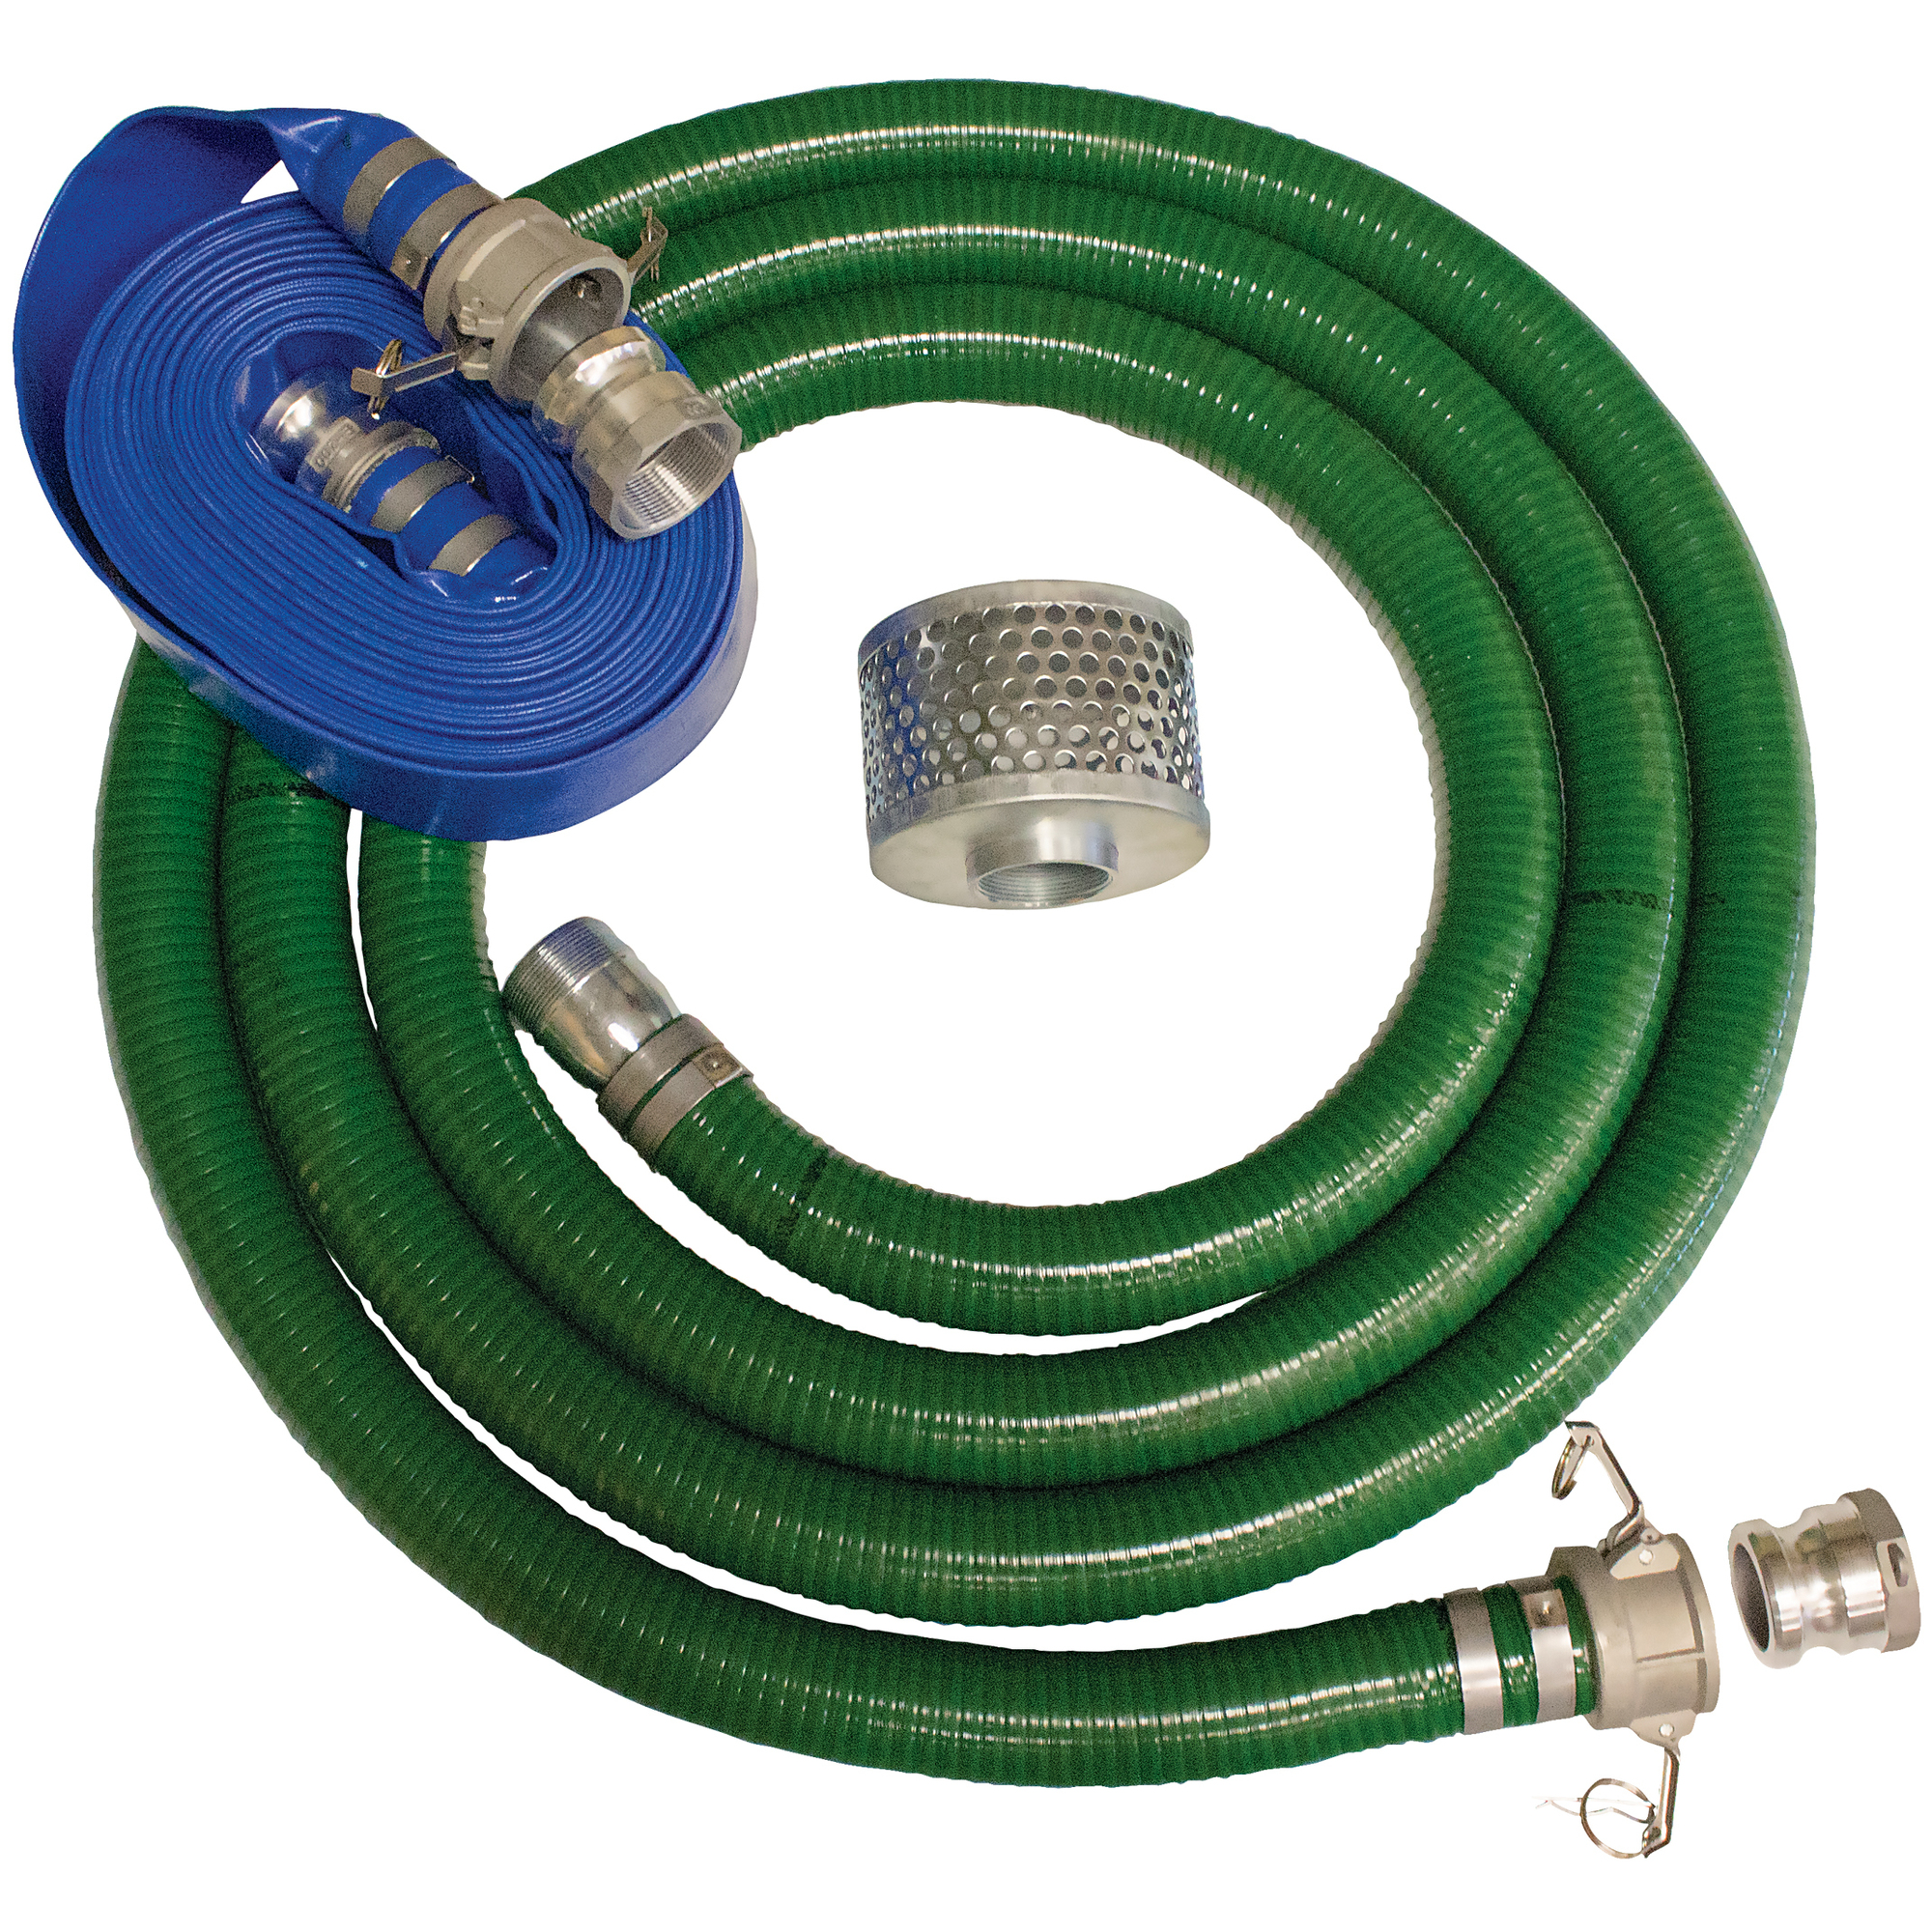 4Inch Hose Kit with 20ft. intake and 50ft. discharge, Hose Diameter 4 in, Hose Length 0 ft, Max. PSI 65, Model - Brave BRHK4